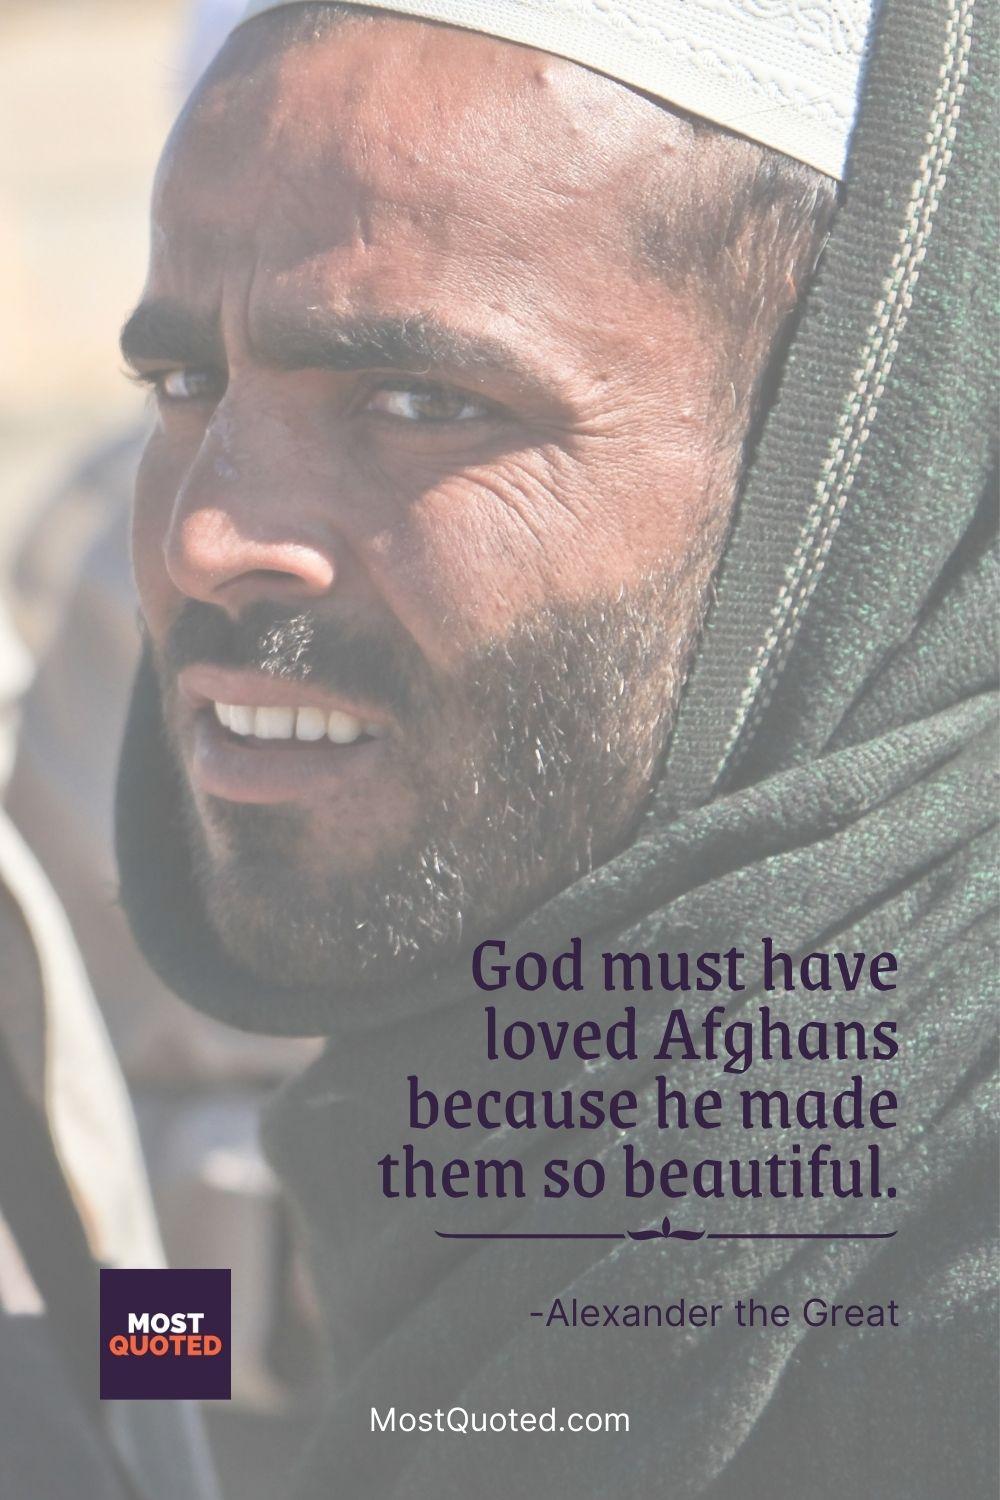 God must have loved Afghans because he made them so beautiful. - Alexander the Great